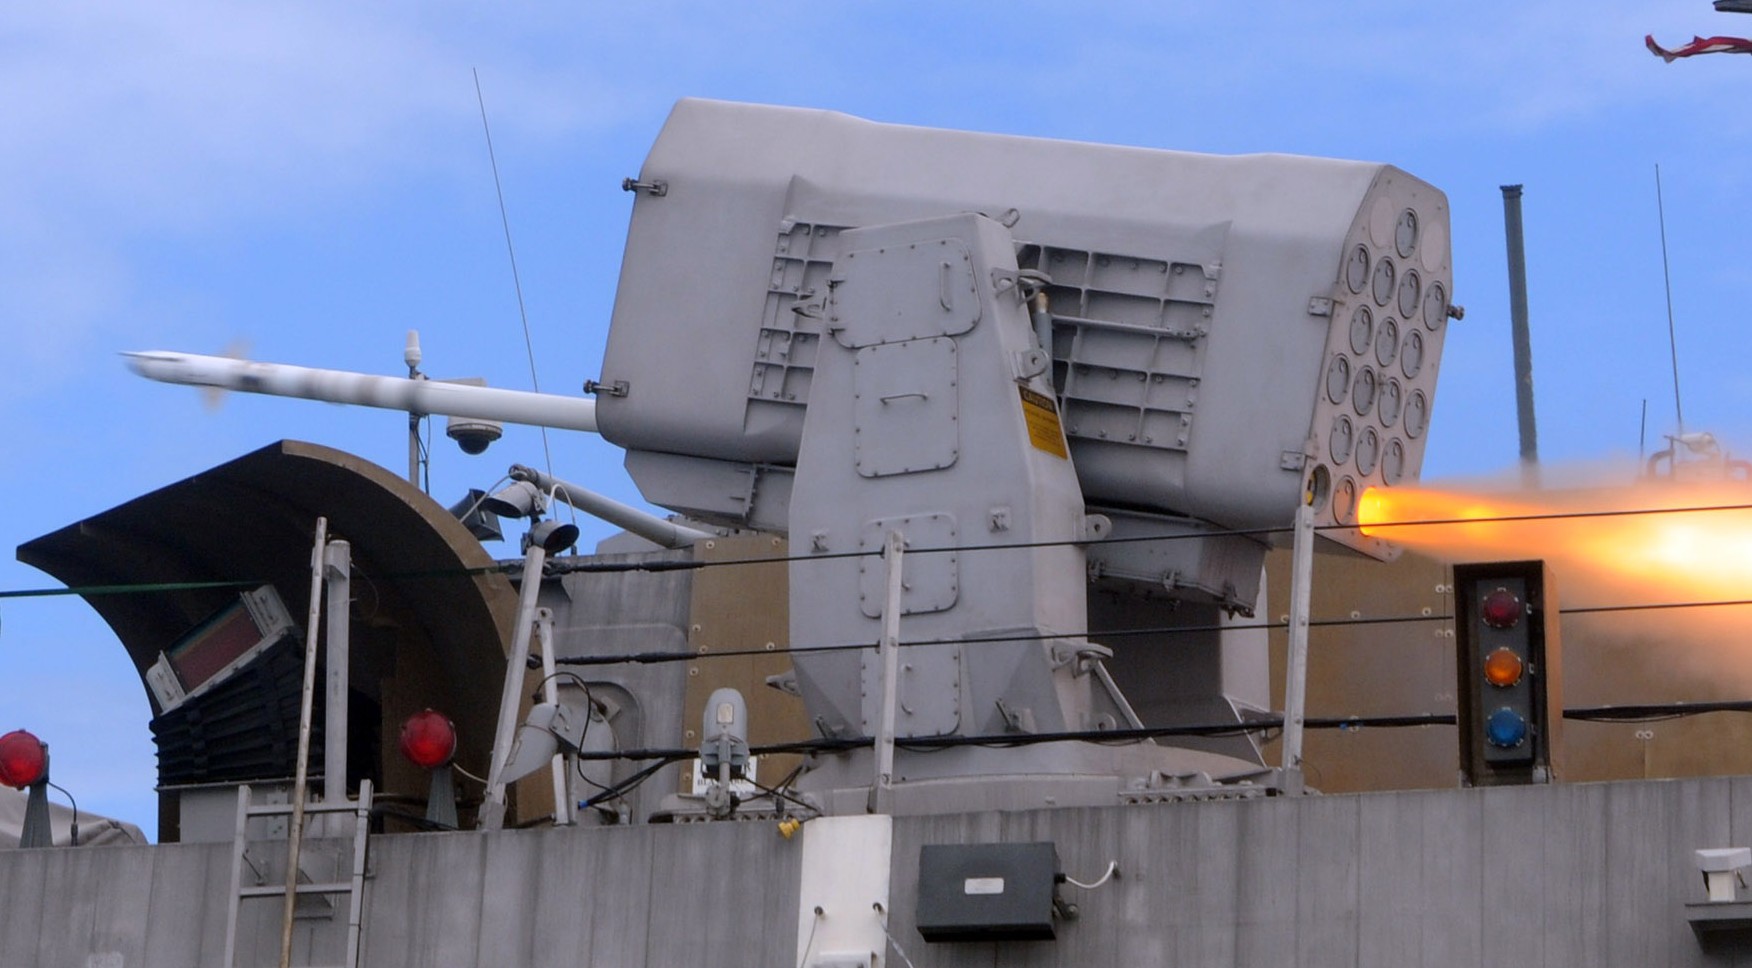 lcs-1 uss freedom rim-116 rolling airframe missile ram firing rimpac 2010 exercise